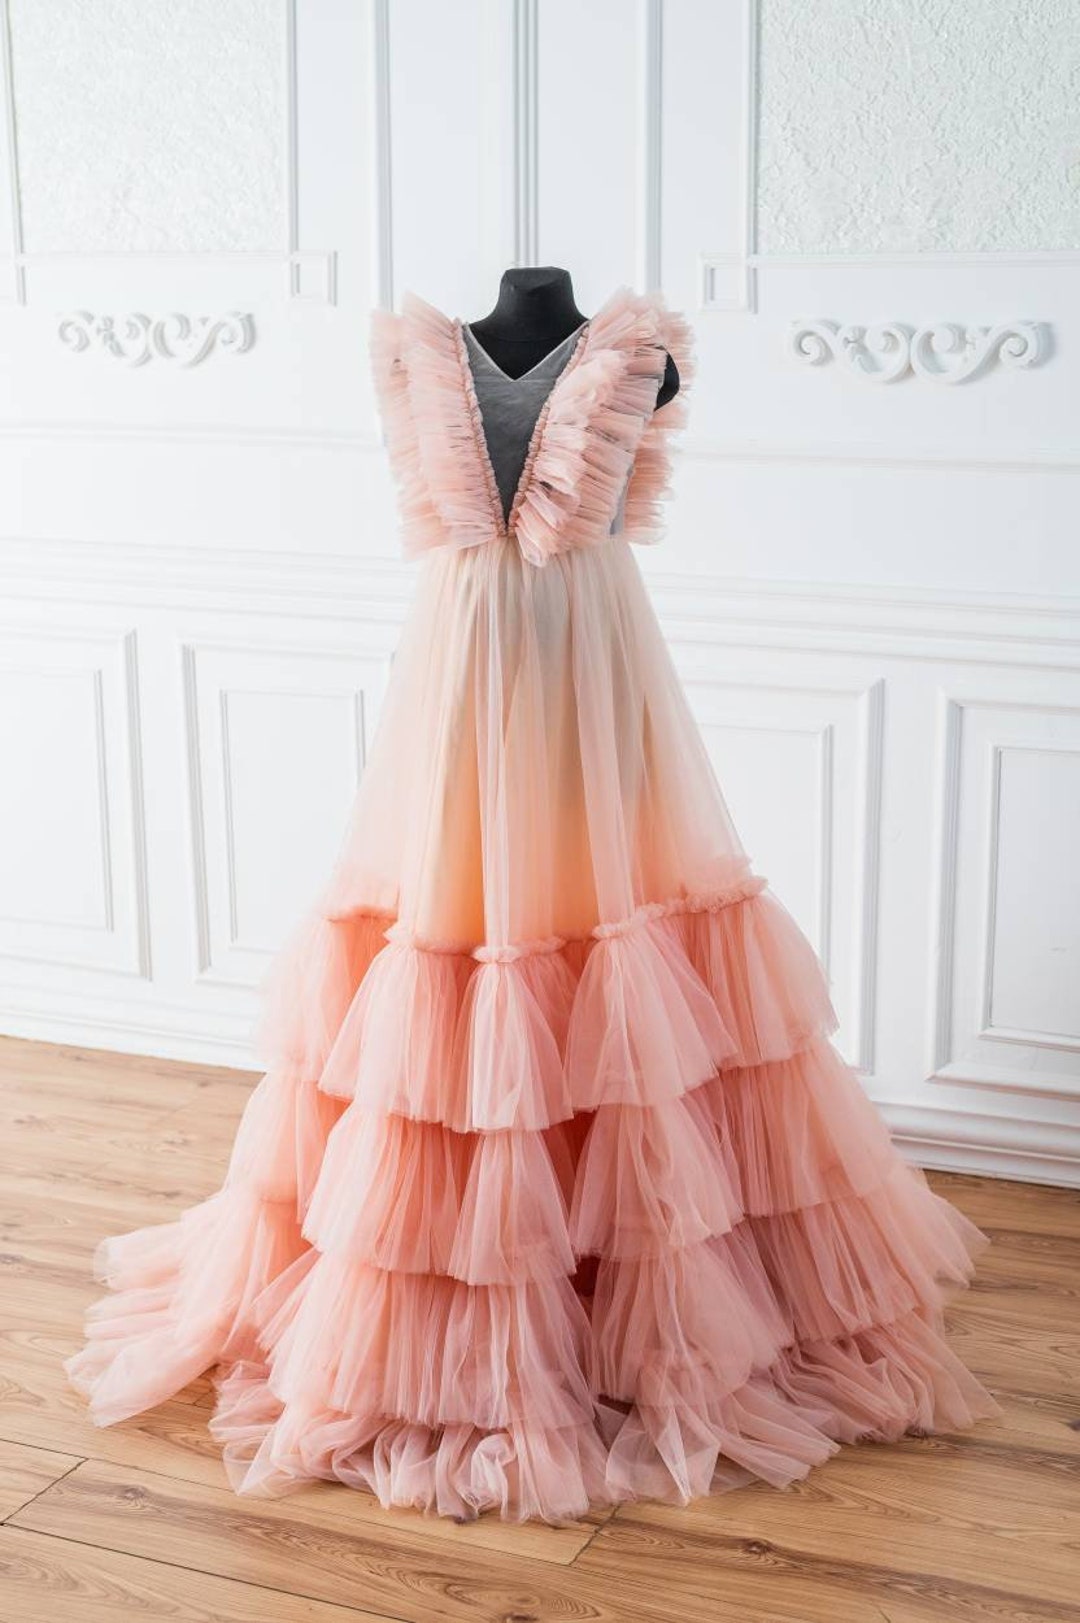 Matchinglook Pink Maternity Robe, Frilled Maternity Gown, Pink Tulle Robe, Maternity Photoshoot Robe, Boudoir Tulle Dress, Sheer Ruffle Gown Robe Hot Pink / One